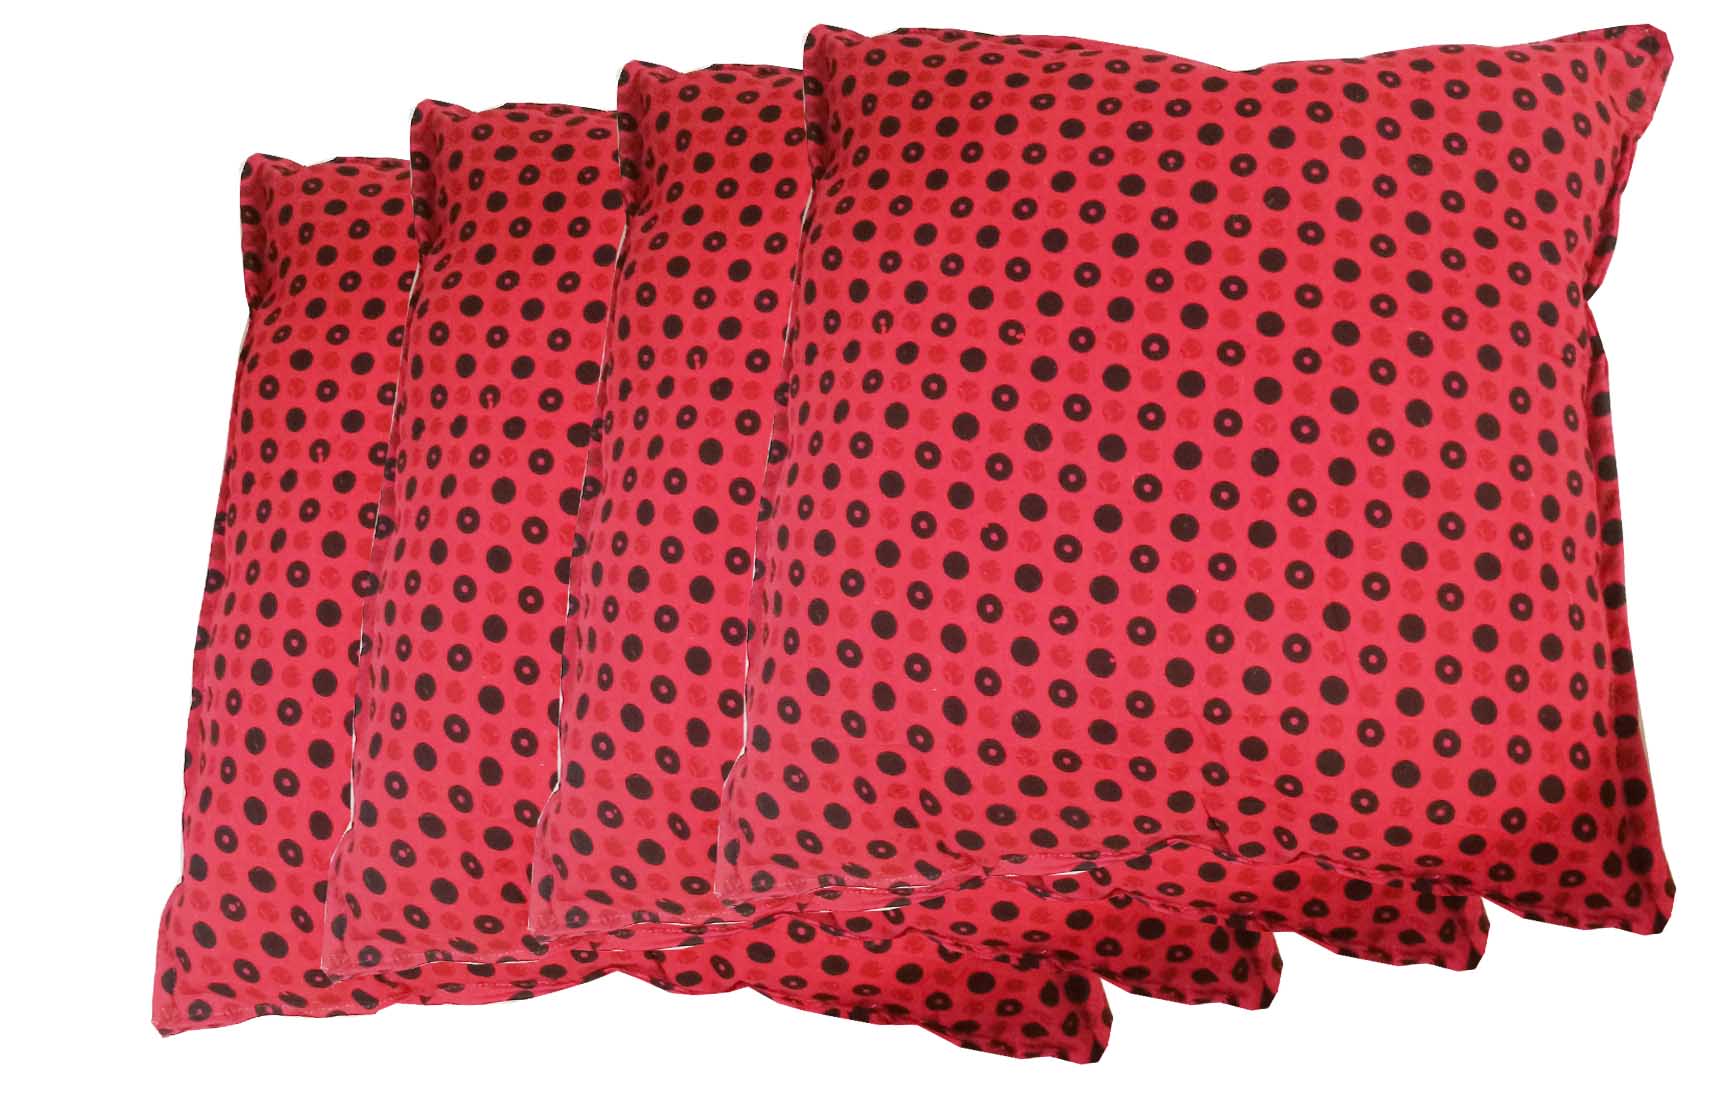 Handmakers Cotton Square Chair Pad Seat Cushion (18 inch X 18 Inch, Red)